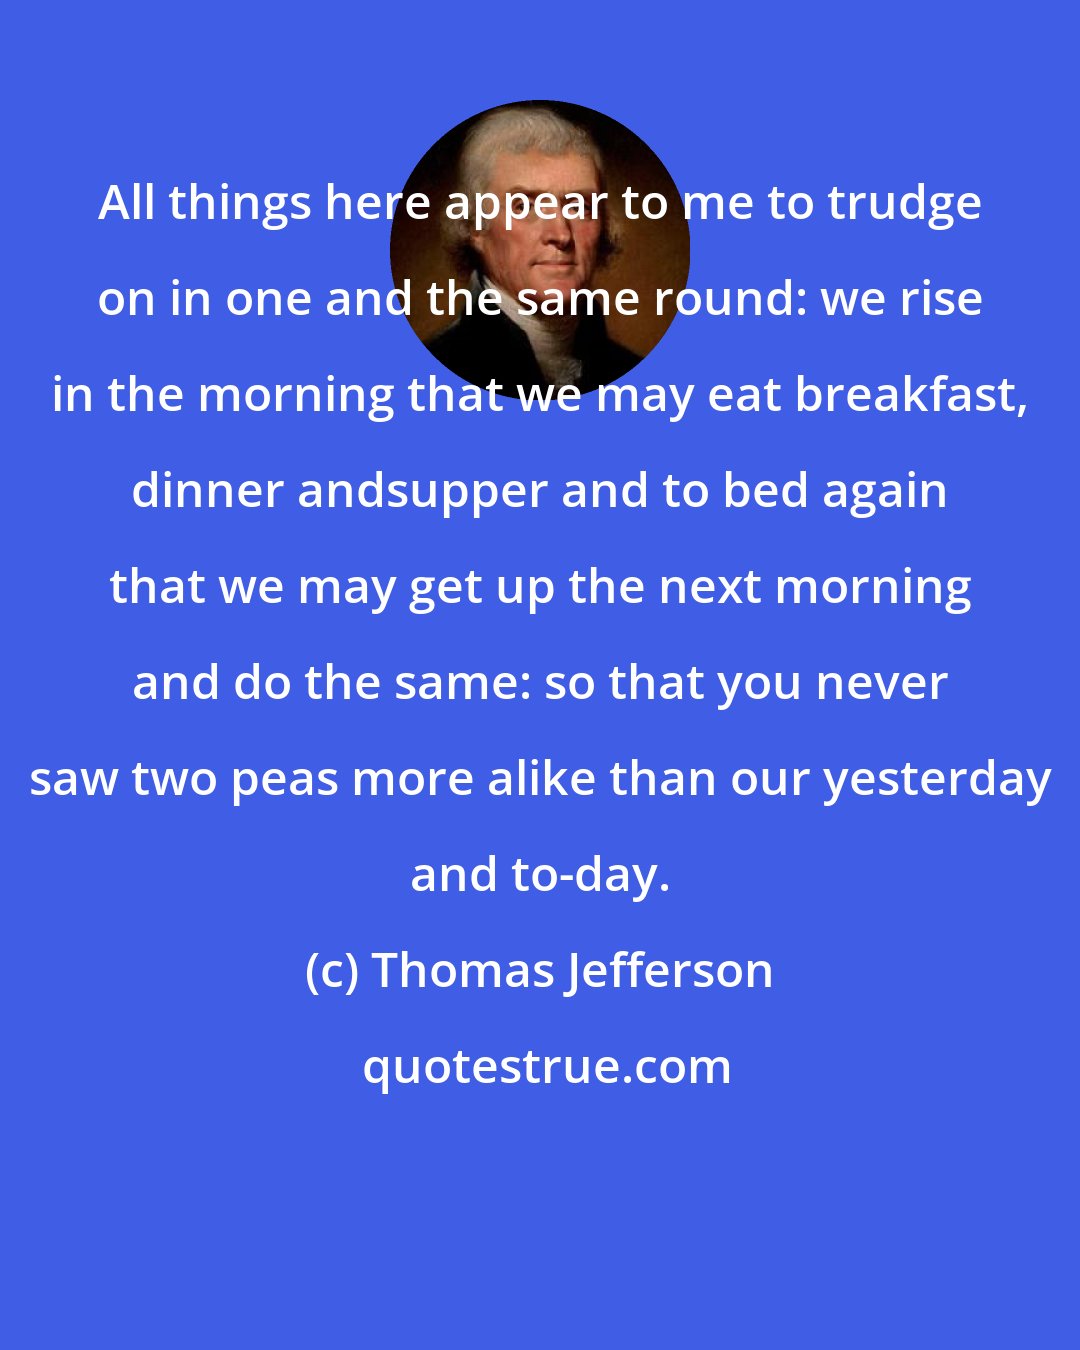 Thomas Jefferson: All things here appear to me to trudge on in one and the same round: we rise in the morning that we may eat breakfast, dinner andsupper and to bed again that we may get up the next morning and do the same: so that you never saw two peas more alike than our yesterday and to-day.